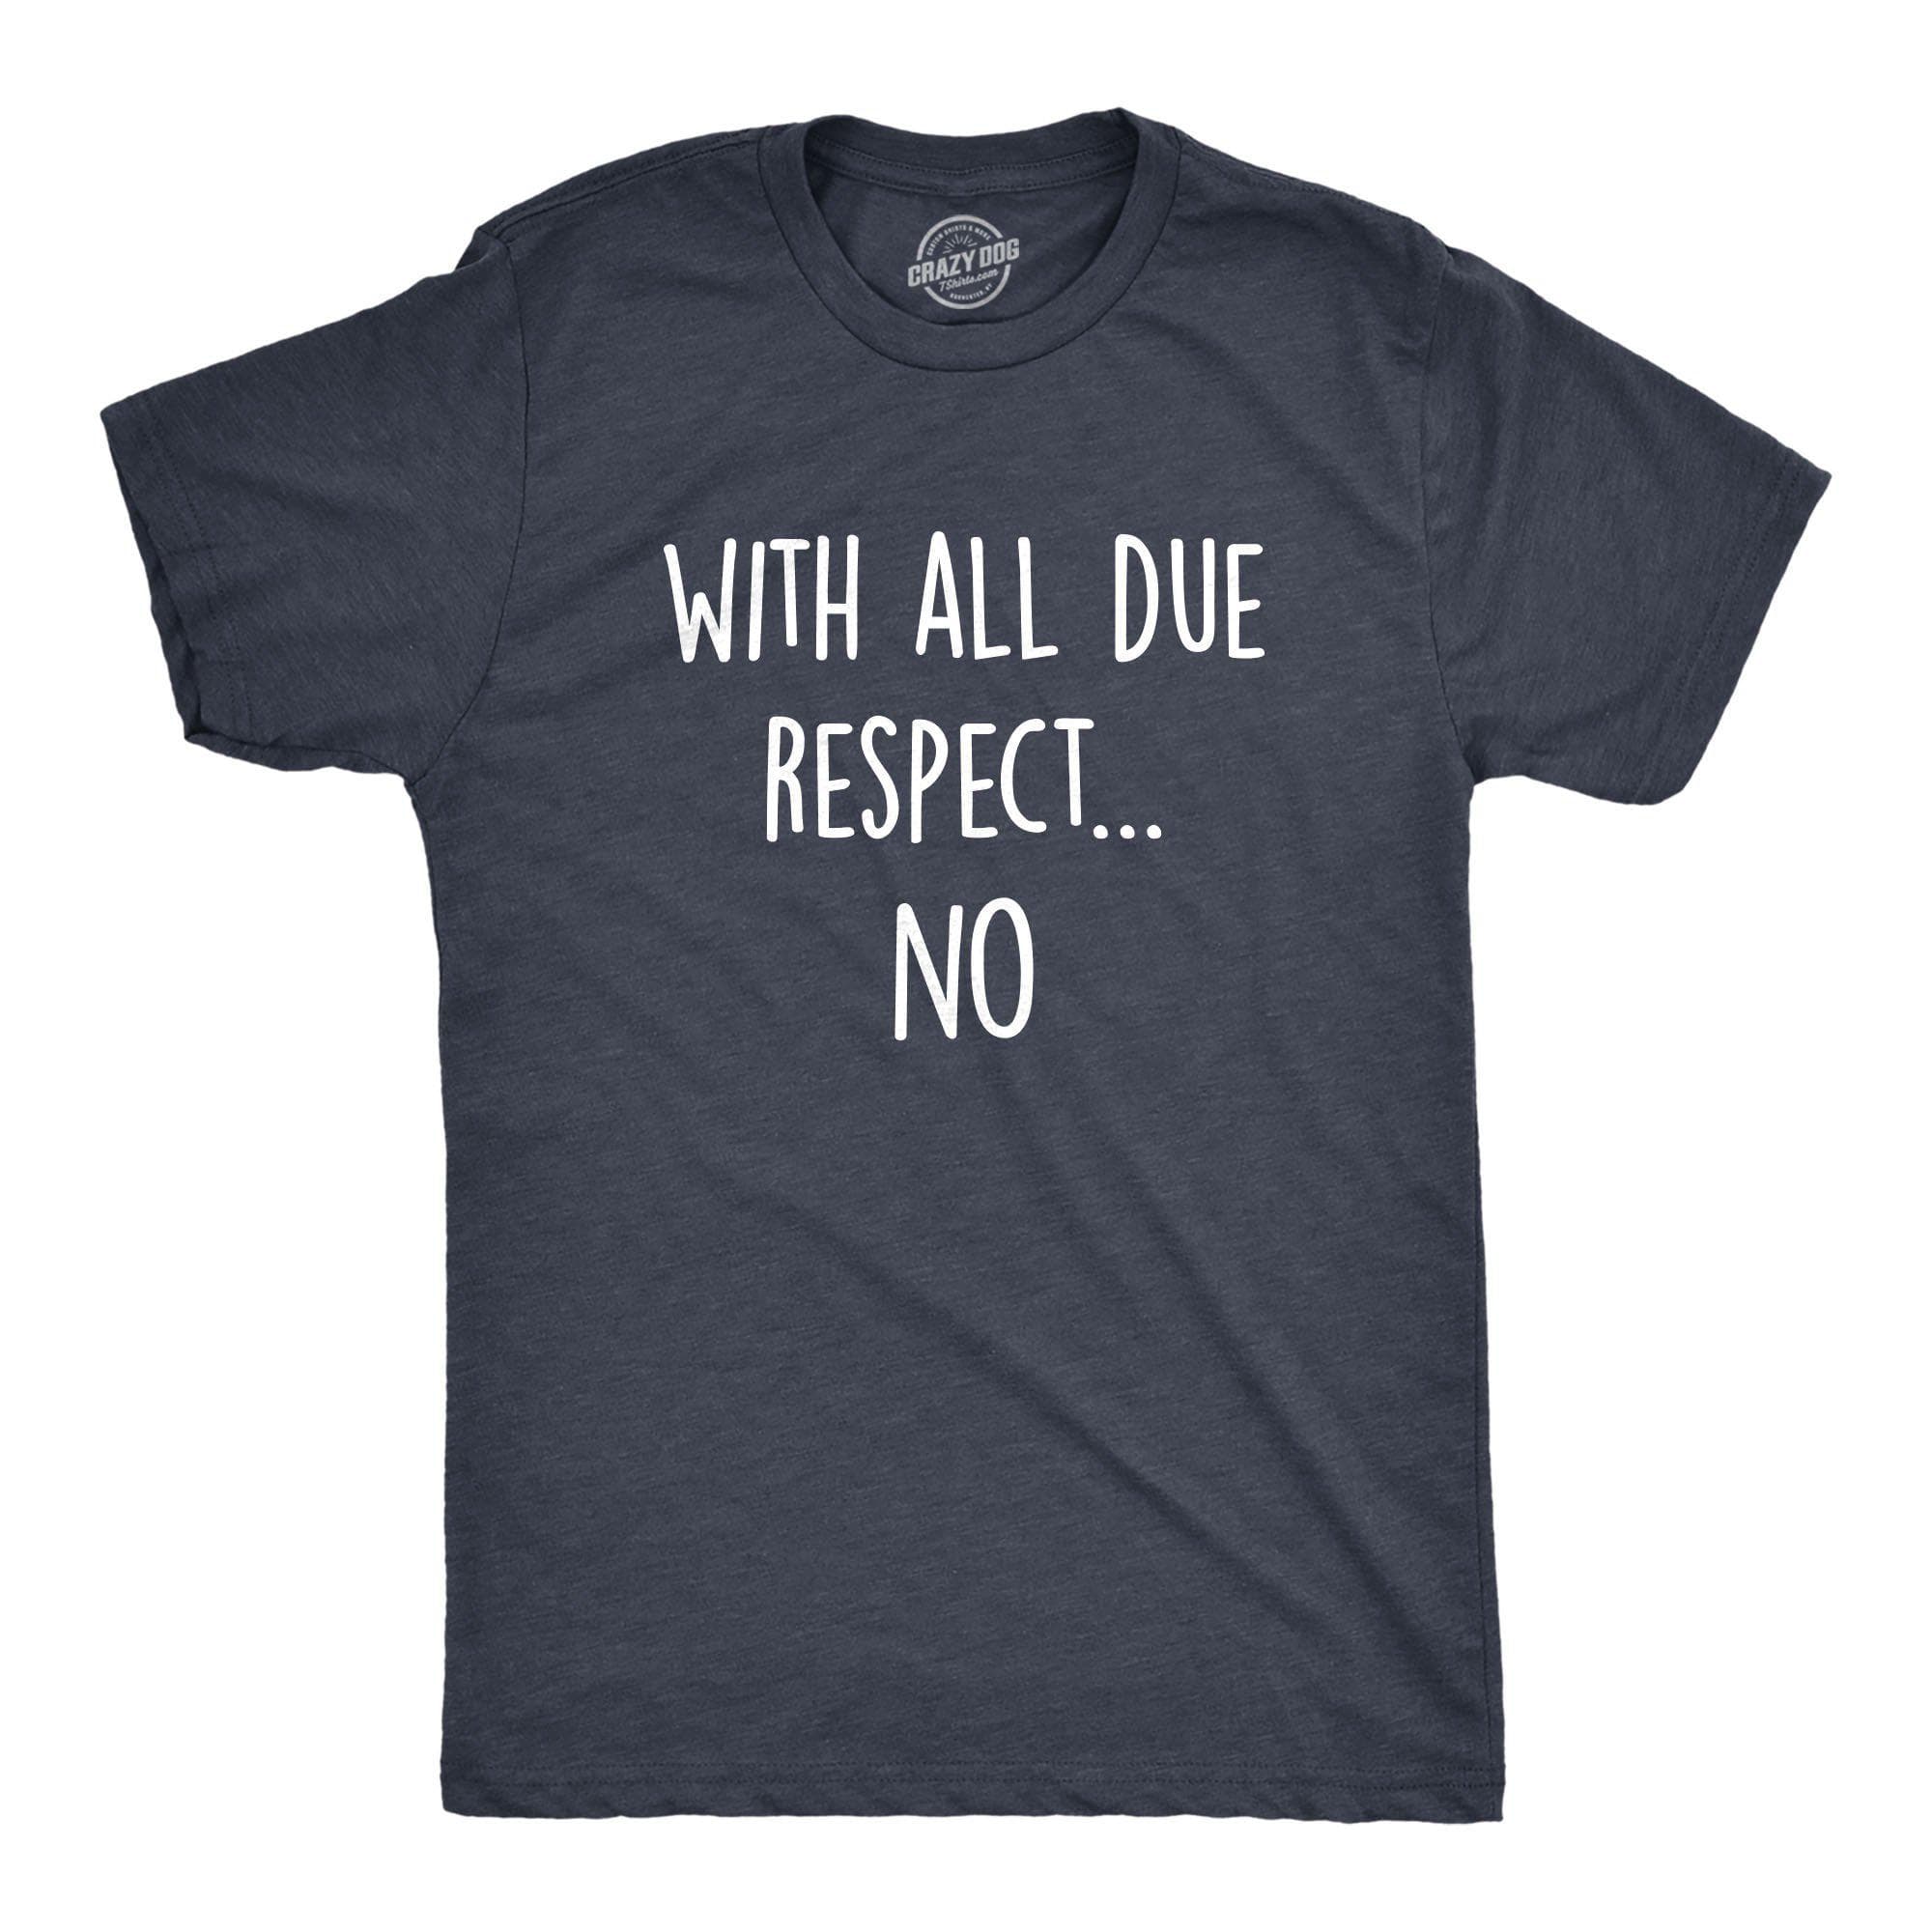 With All Due Respect No Men's Tshirt - Crazy Dog T-Shirts